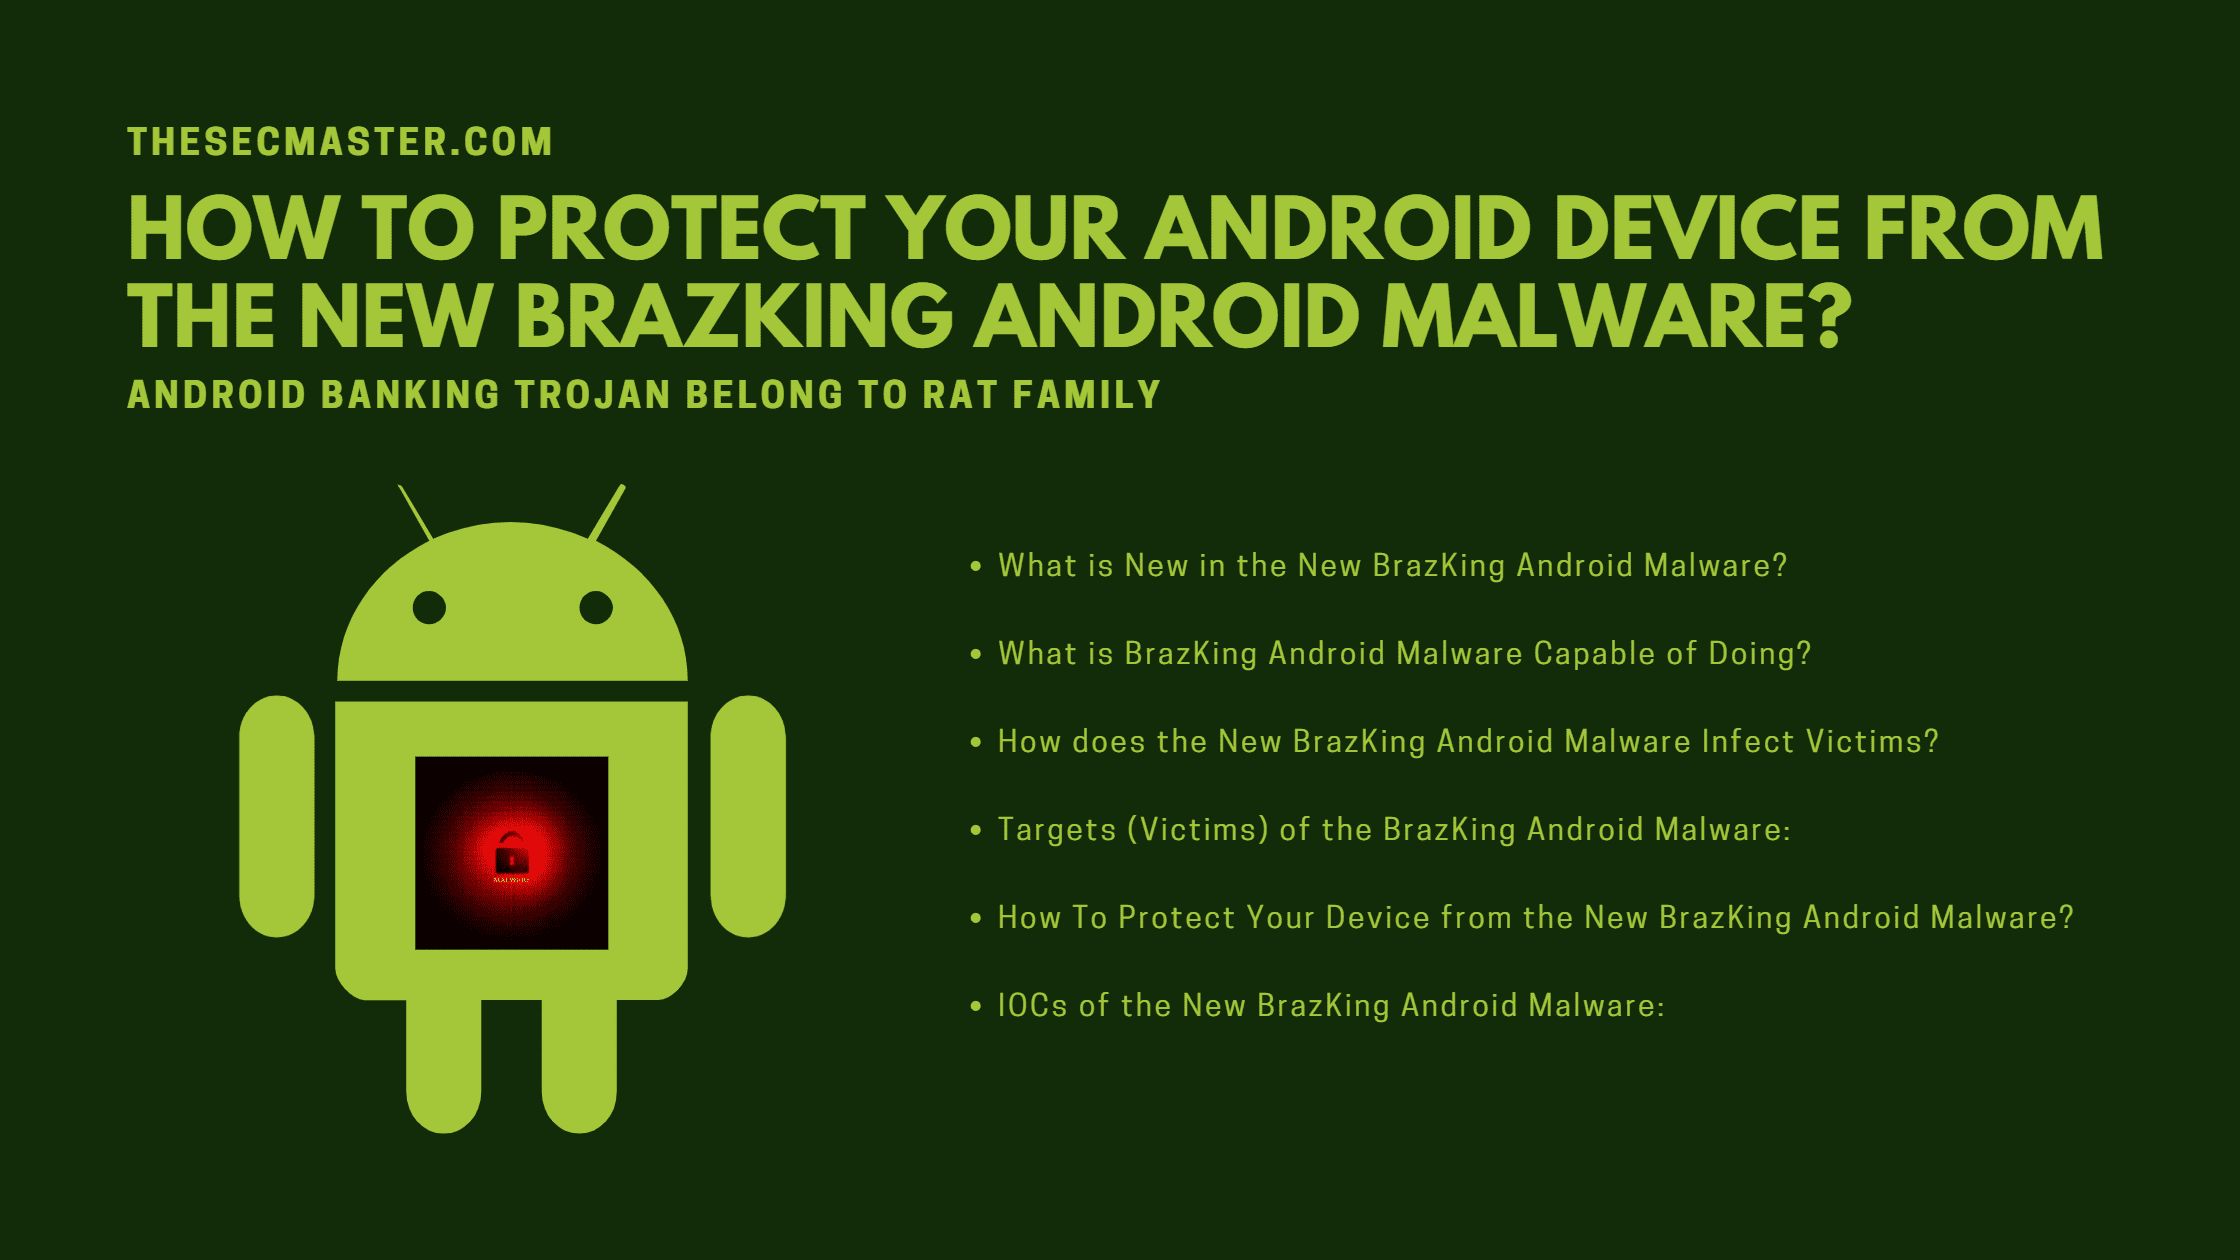 How To Protect Your Android Device From The New Brazking Android Malware